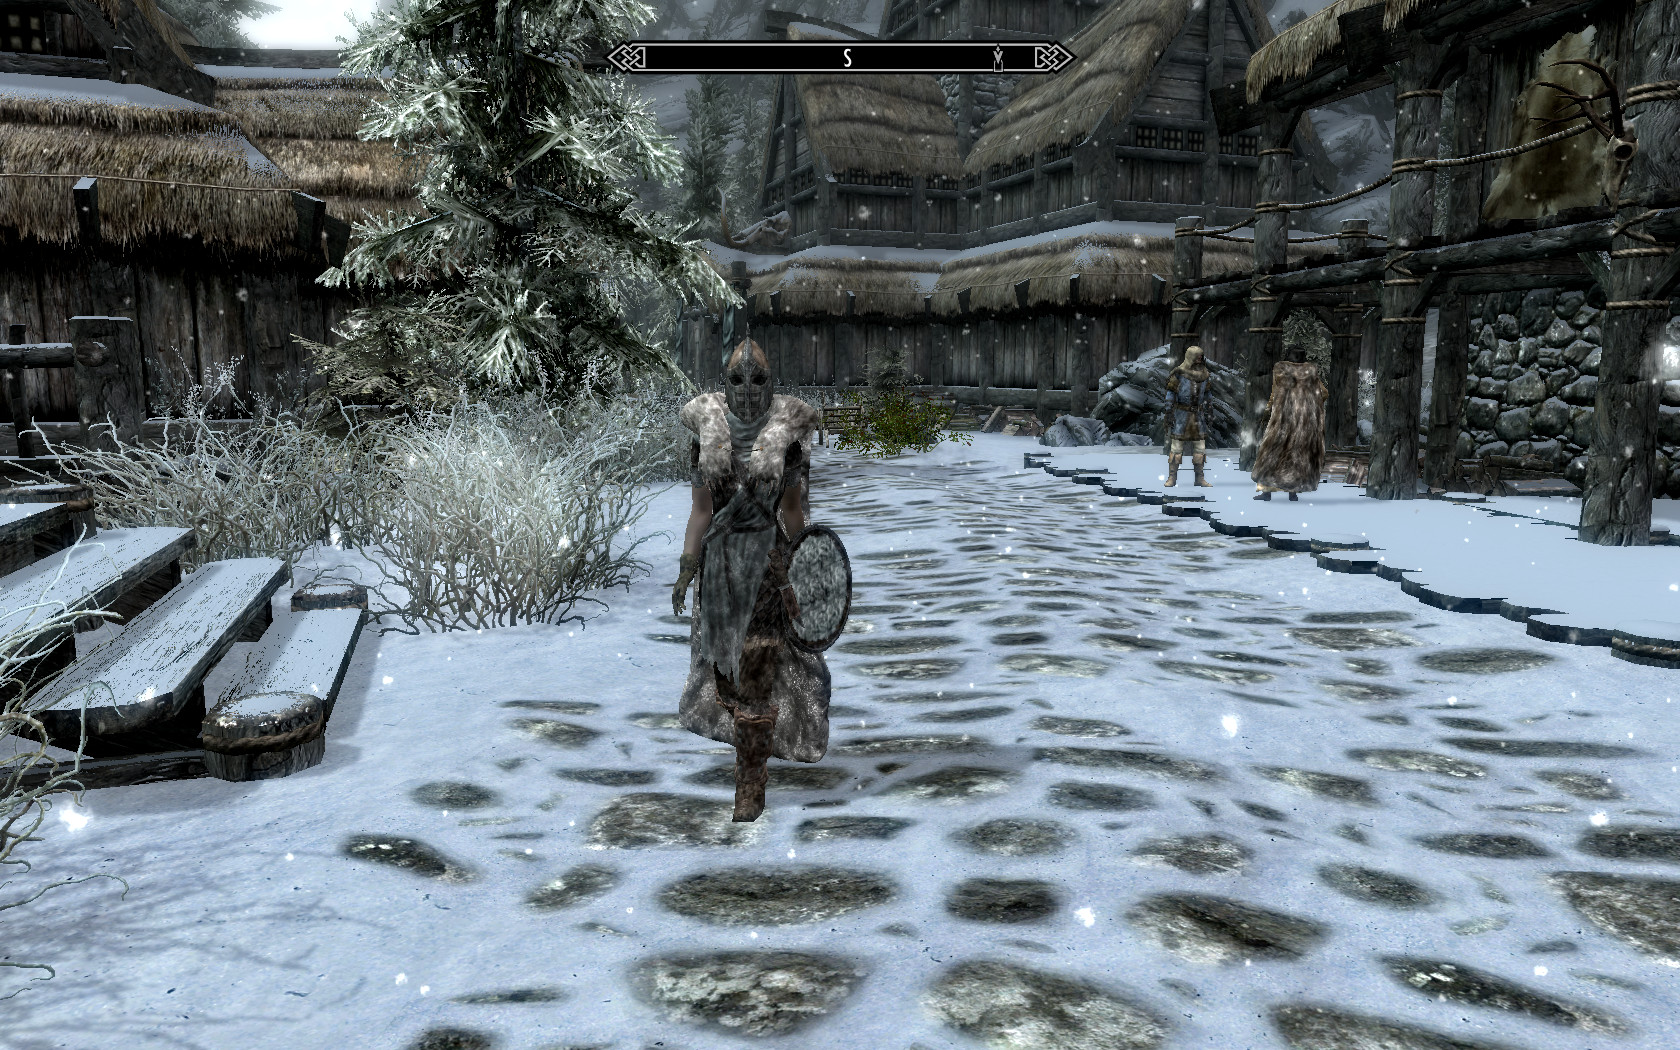 skyrim legendary edition fixes bugs that look